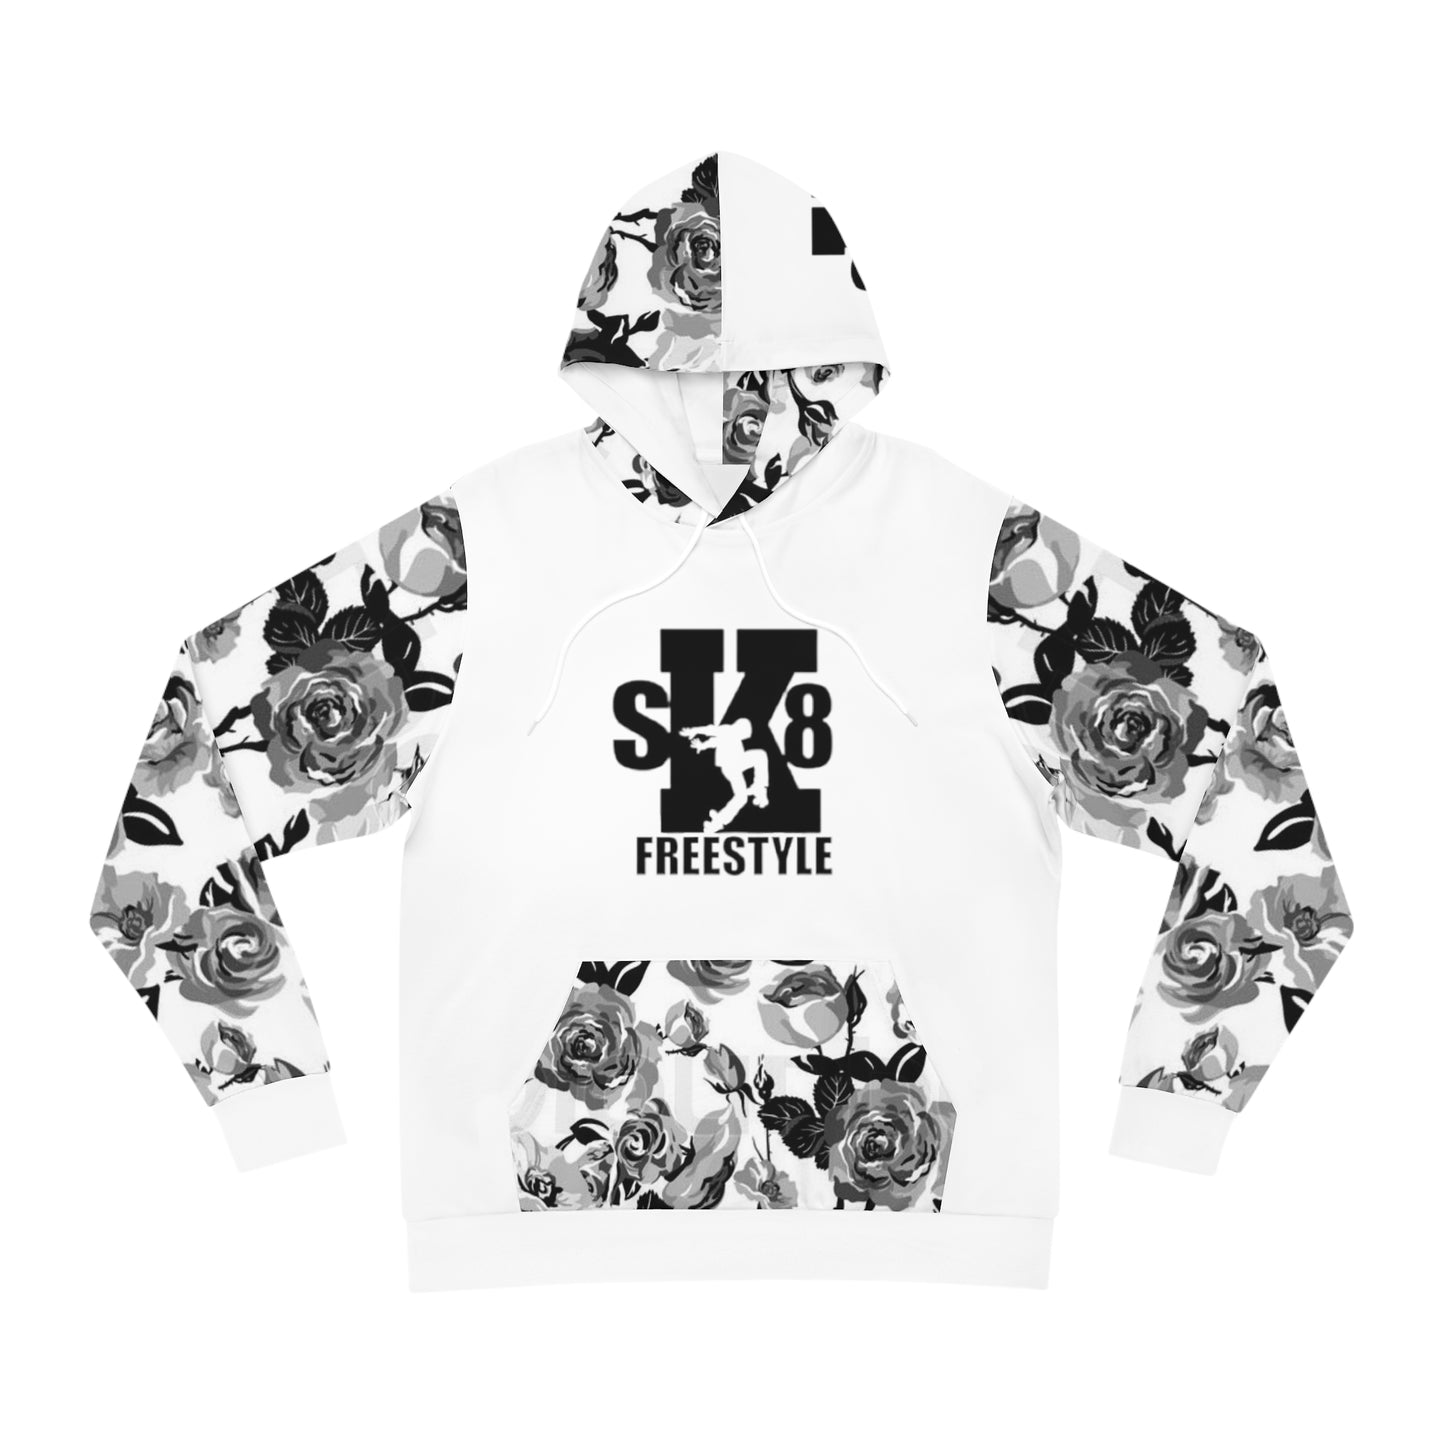 "Sk8t Freestyle" Fashion Hoodie